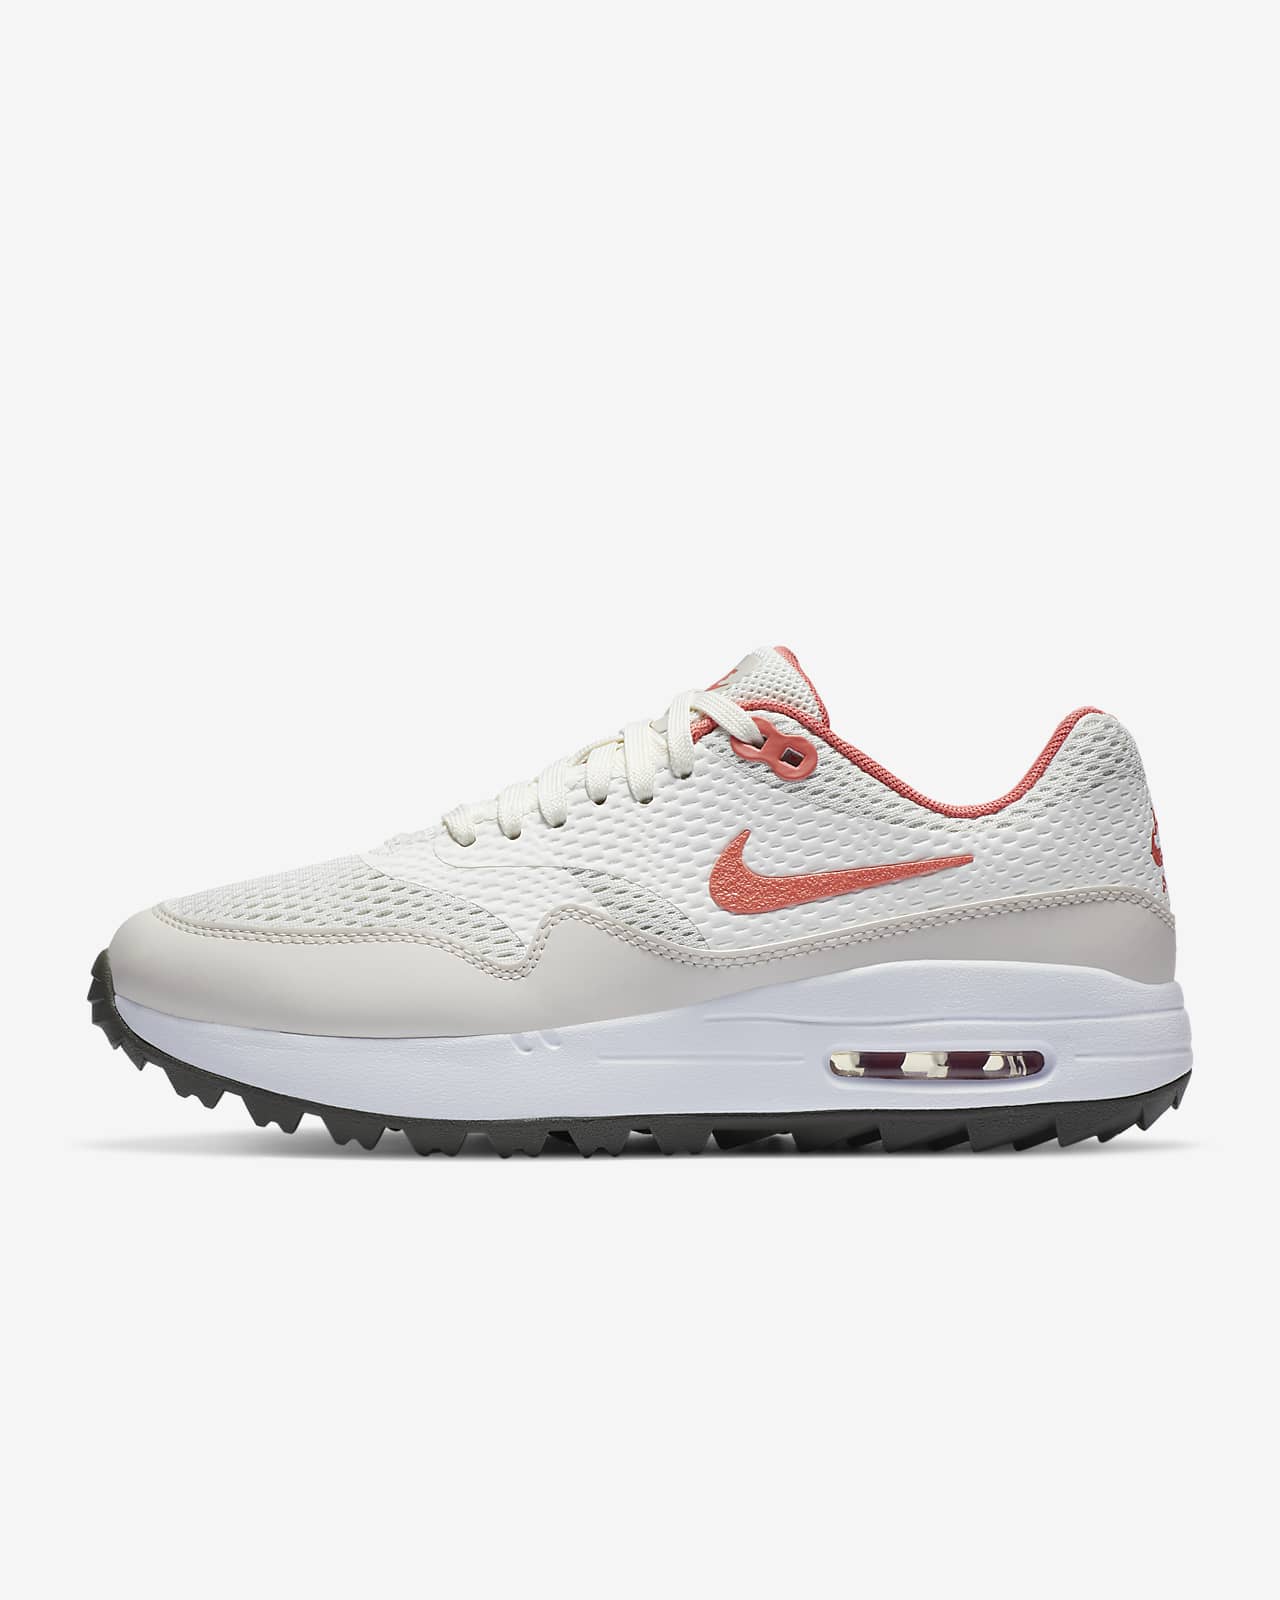 nike by you golf